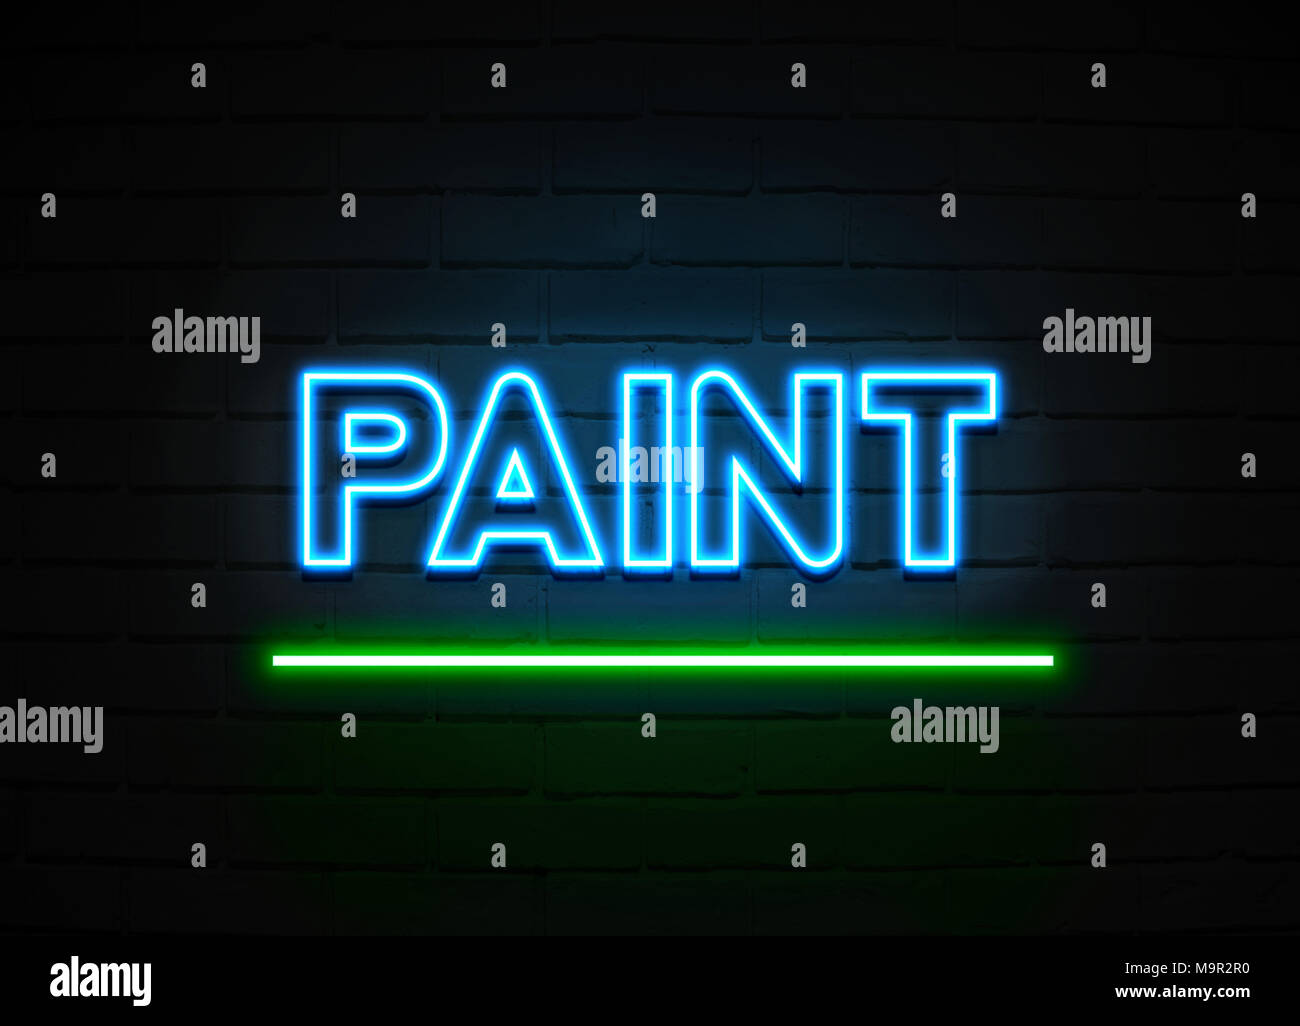 Paint Neon Sign Glowing Neon Sign On Brickwall Wall 3D Rendered